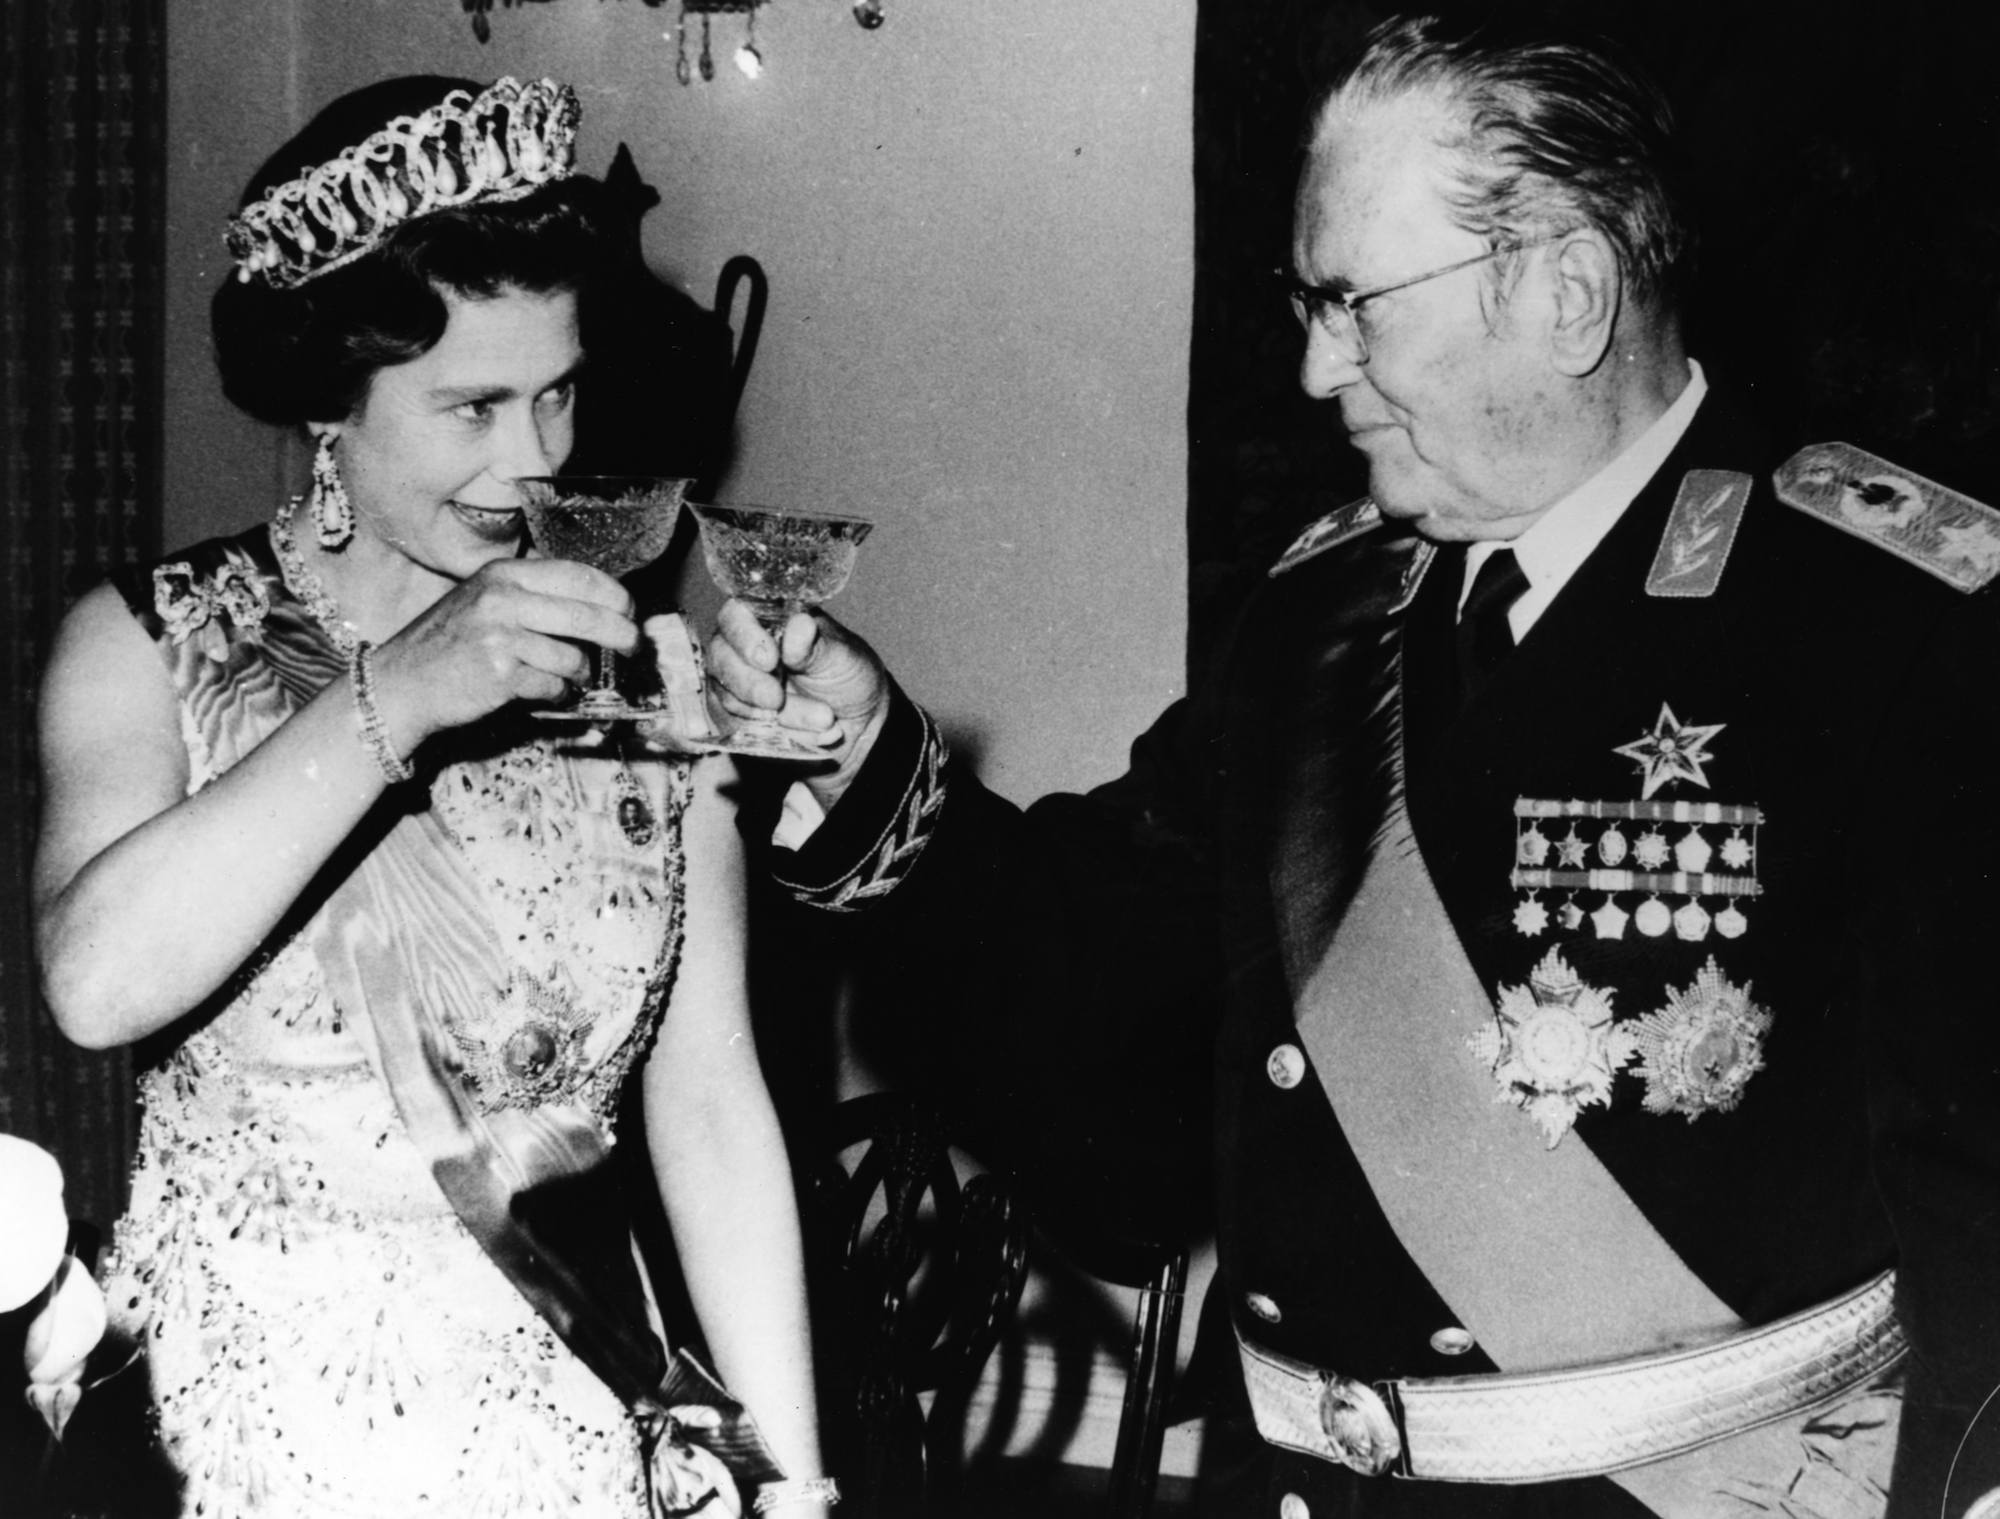 President Josip Broz Tito of Yugoslavia raises a glass to share a toast with Queen Elizabeth II